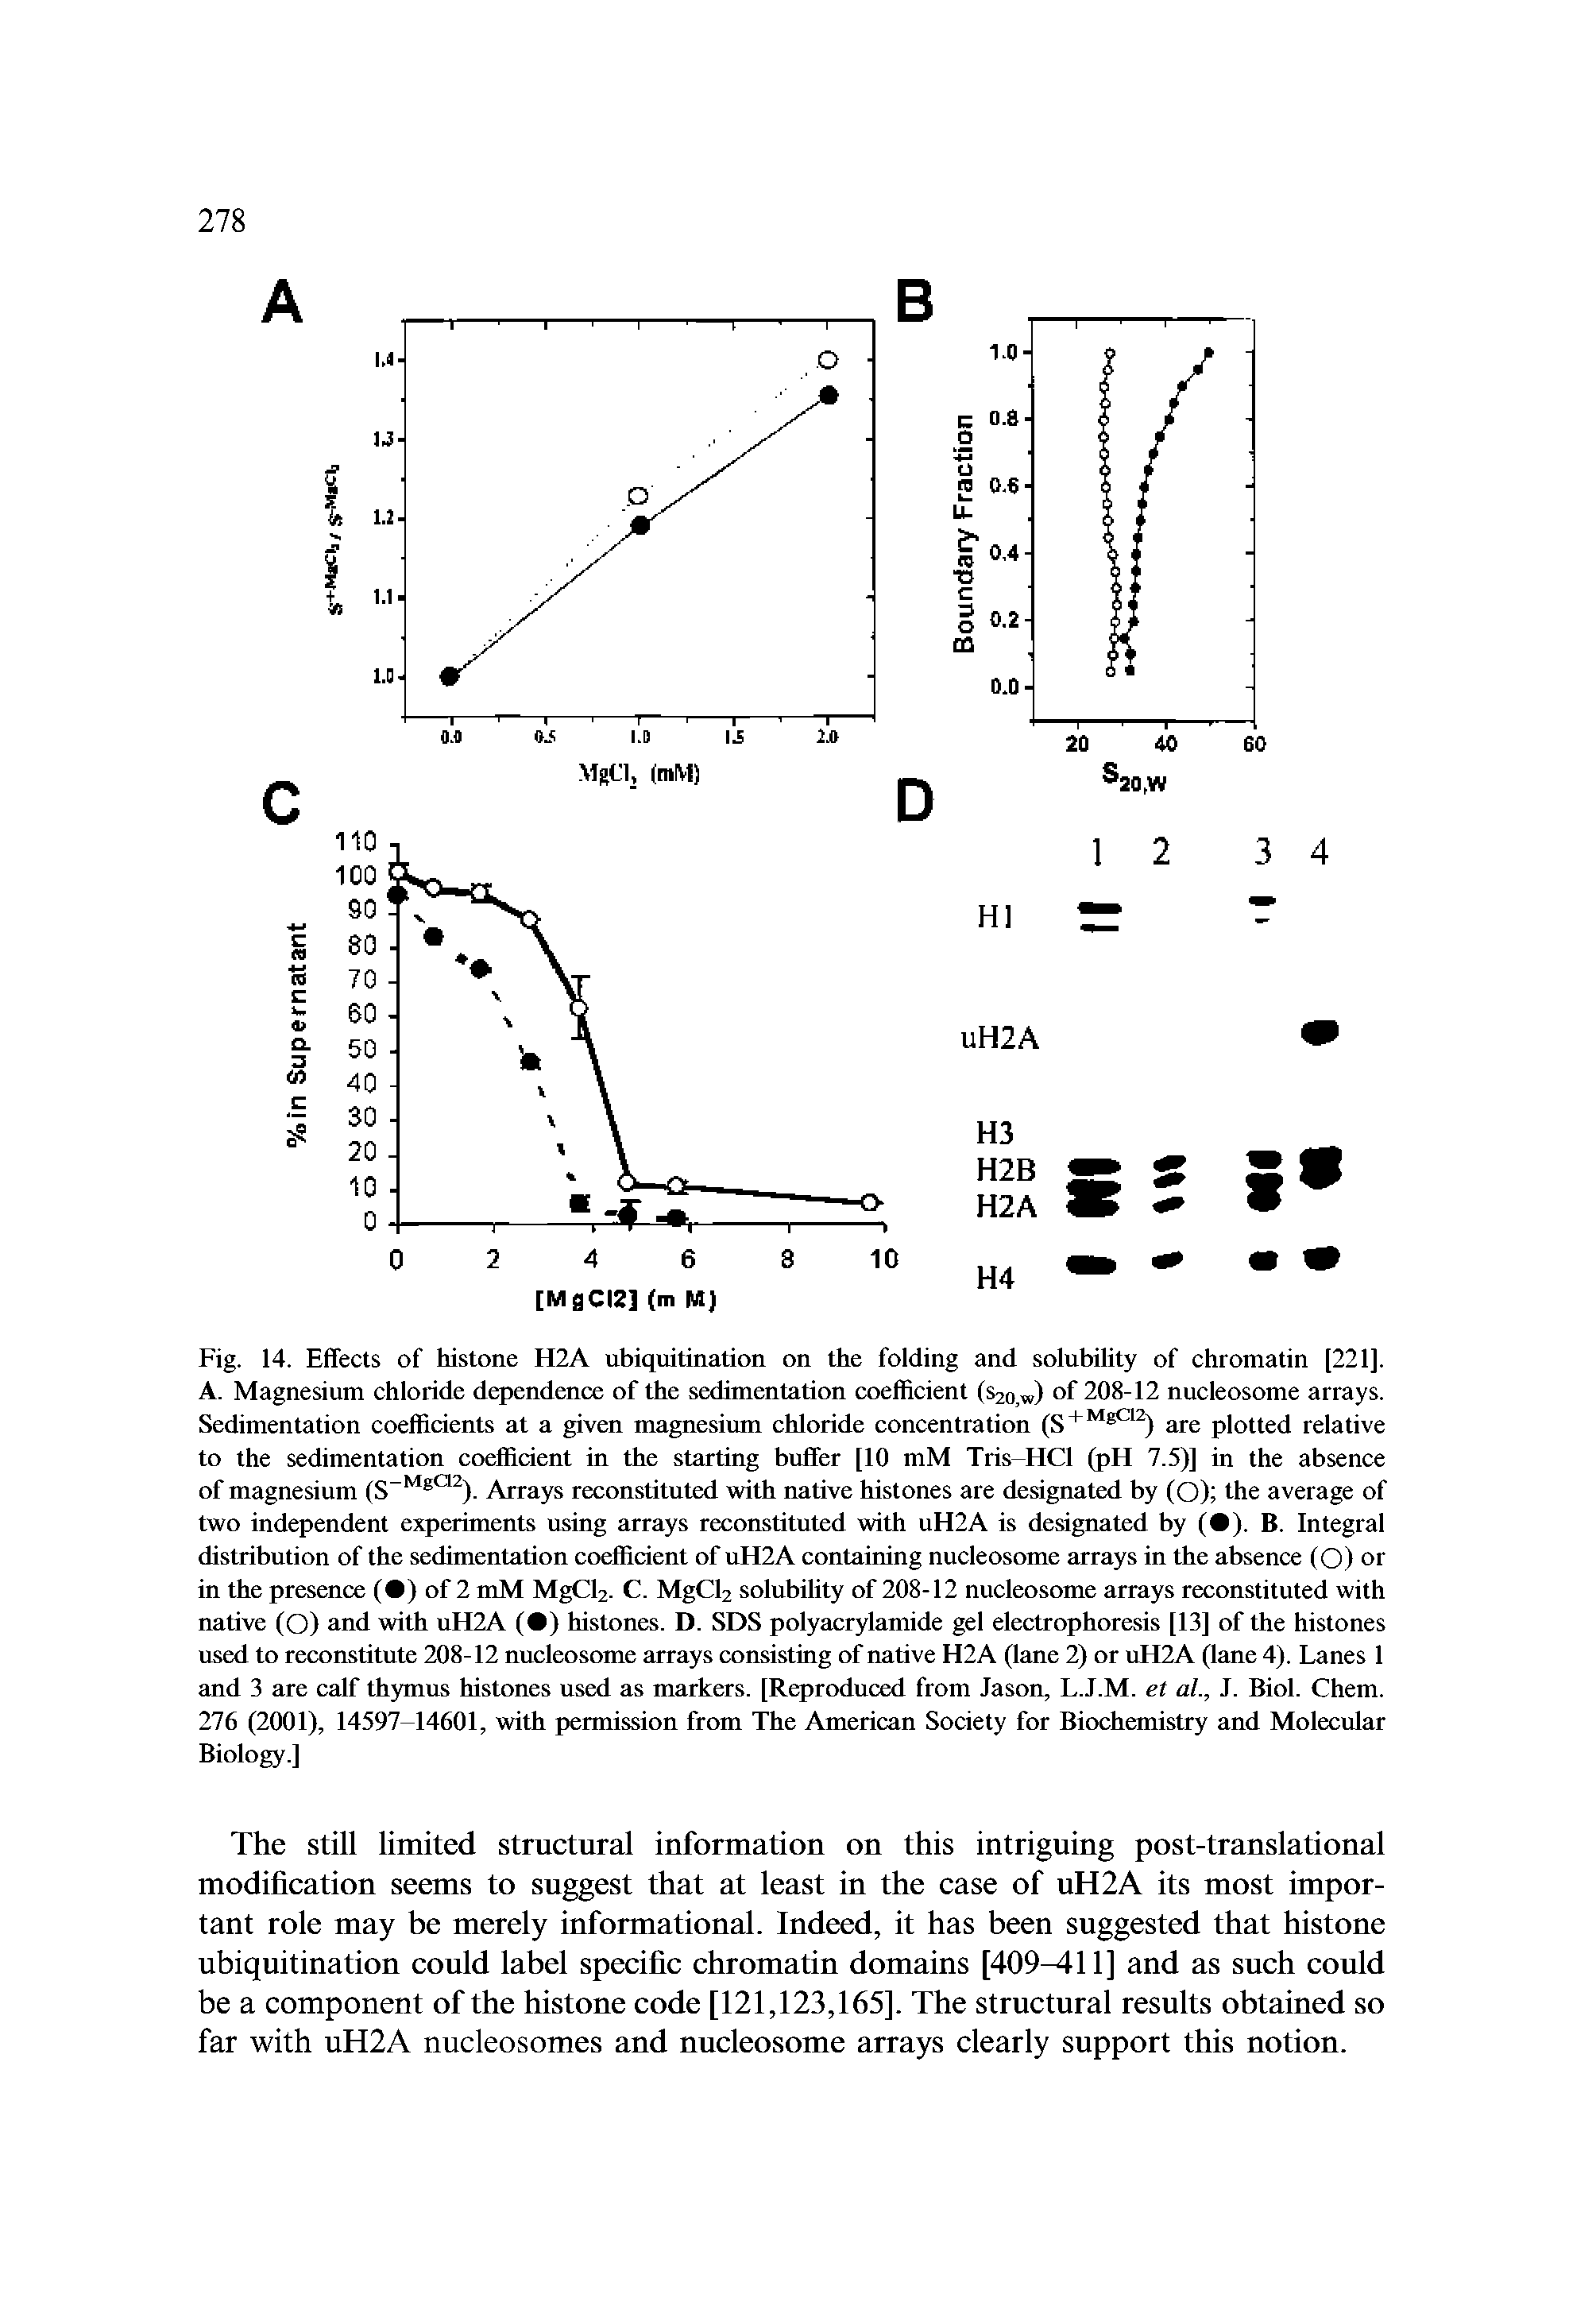 Fig. 14. Effects of histone H2A ubiquitination on the folding and solubility of chromatin [221]. A. Magnesium chloride dependence of the sedimentation coefficient (S2o,w) of 208-12 nucleosome arrays. Sedimentation coefficients at a given magnesium chloride concentration are plotted relative...